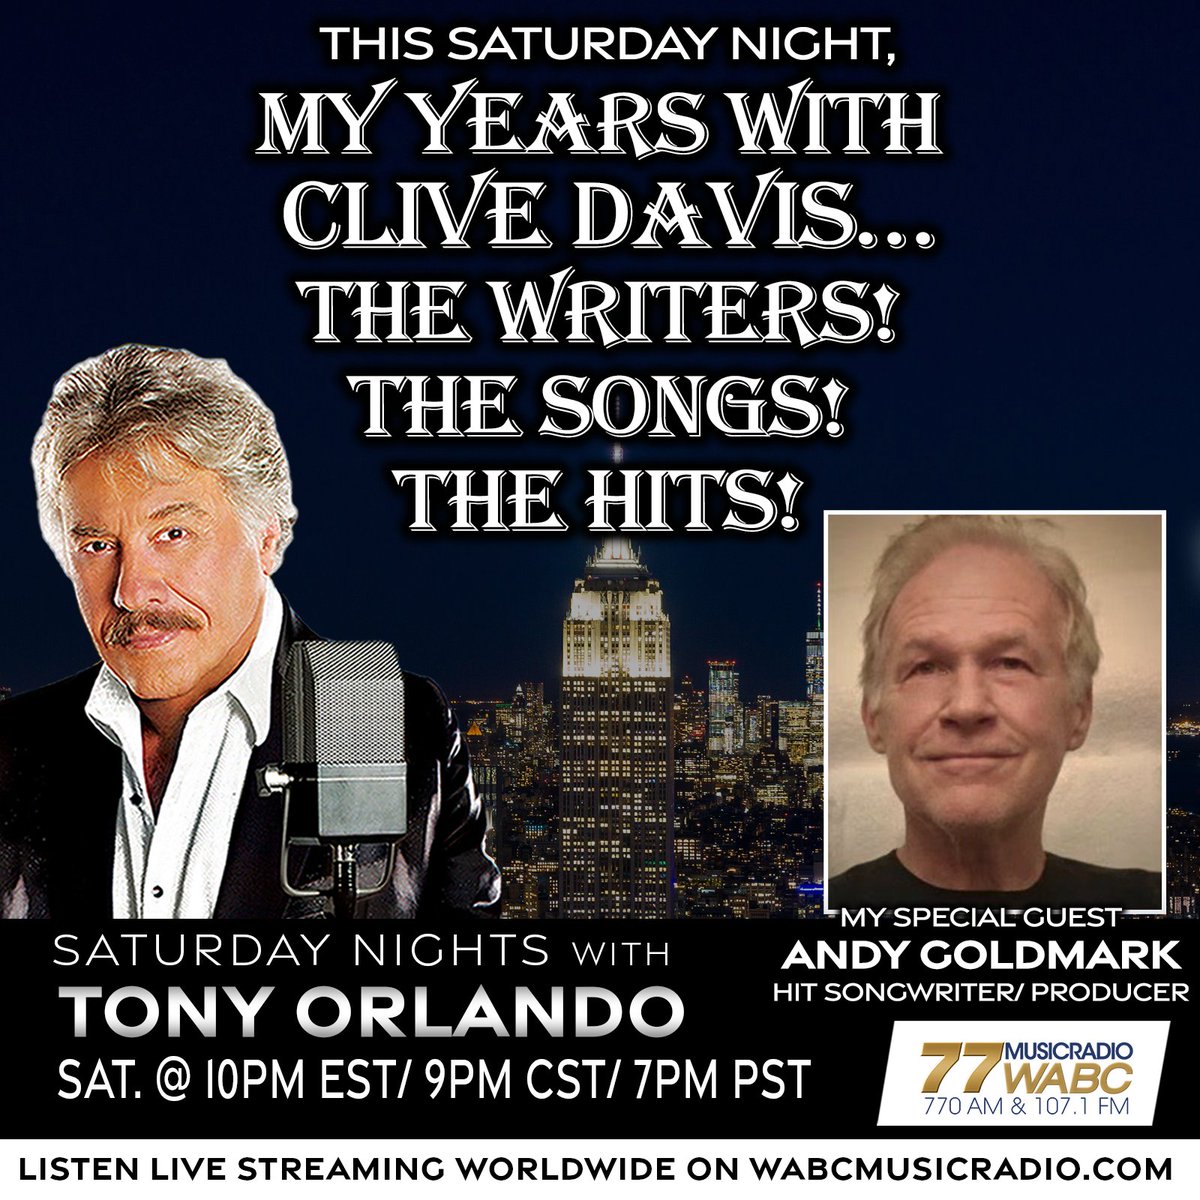 SATURDAY at 10PM:  My Years With Clive Davis…
The Writers! The Songs! The Hits!

Host @TonyOrlando will have guest Andy Goldmark on the show!

Join us SATURDAY from 10PM-midnight on 

wabcmusicradio.com, 770 AM, or on the 77 WABC app!    #77WABCRadio #Music #TonyOrlando